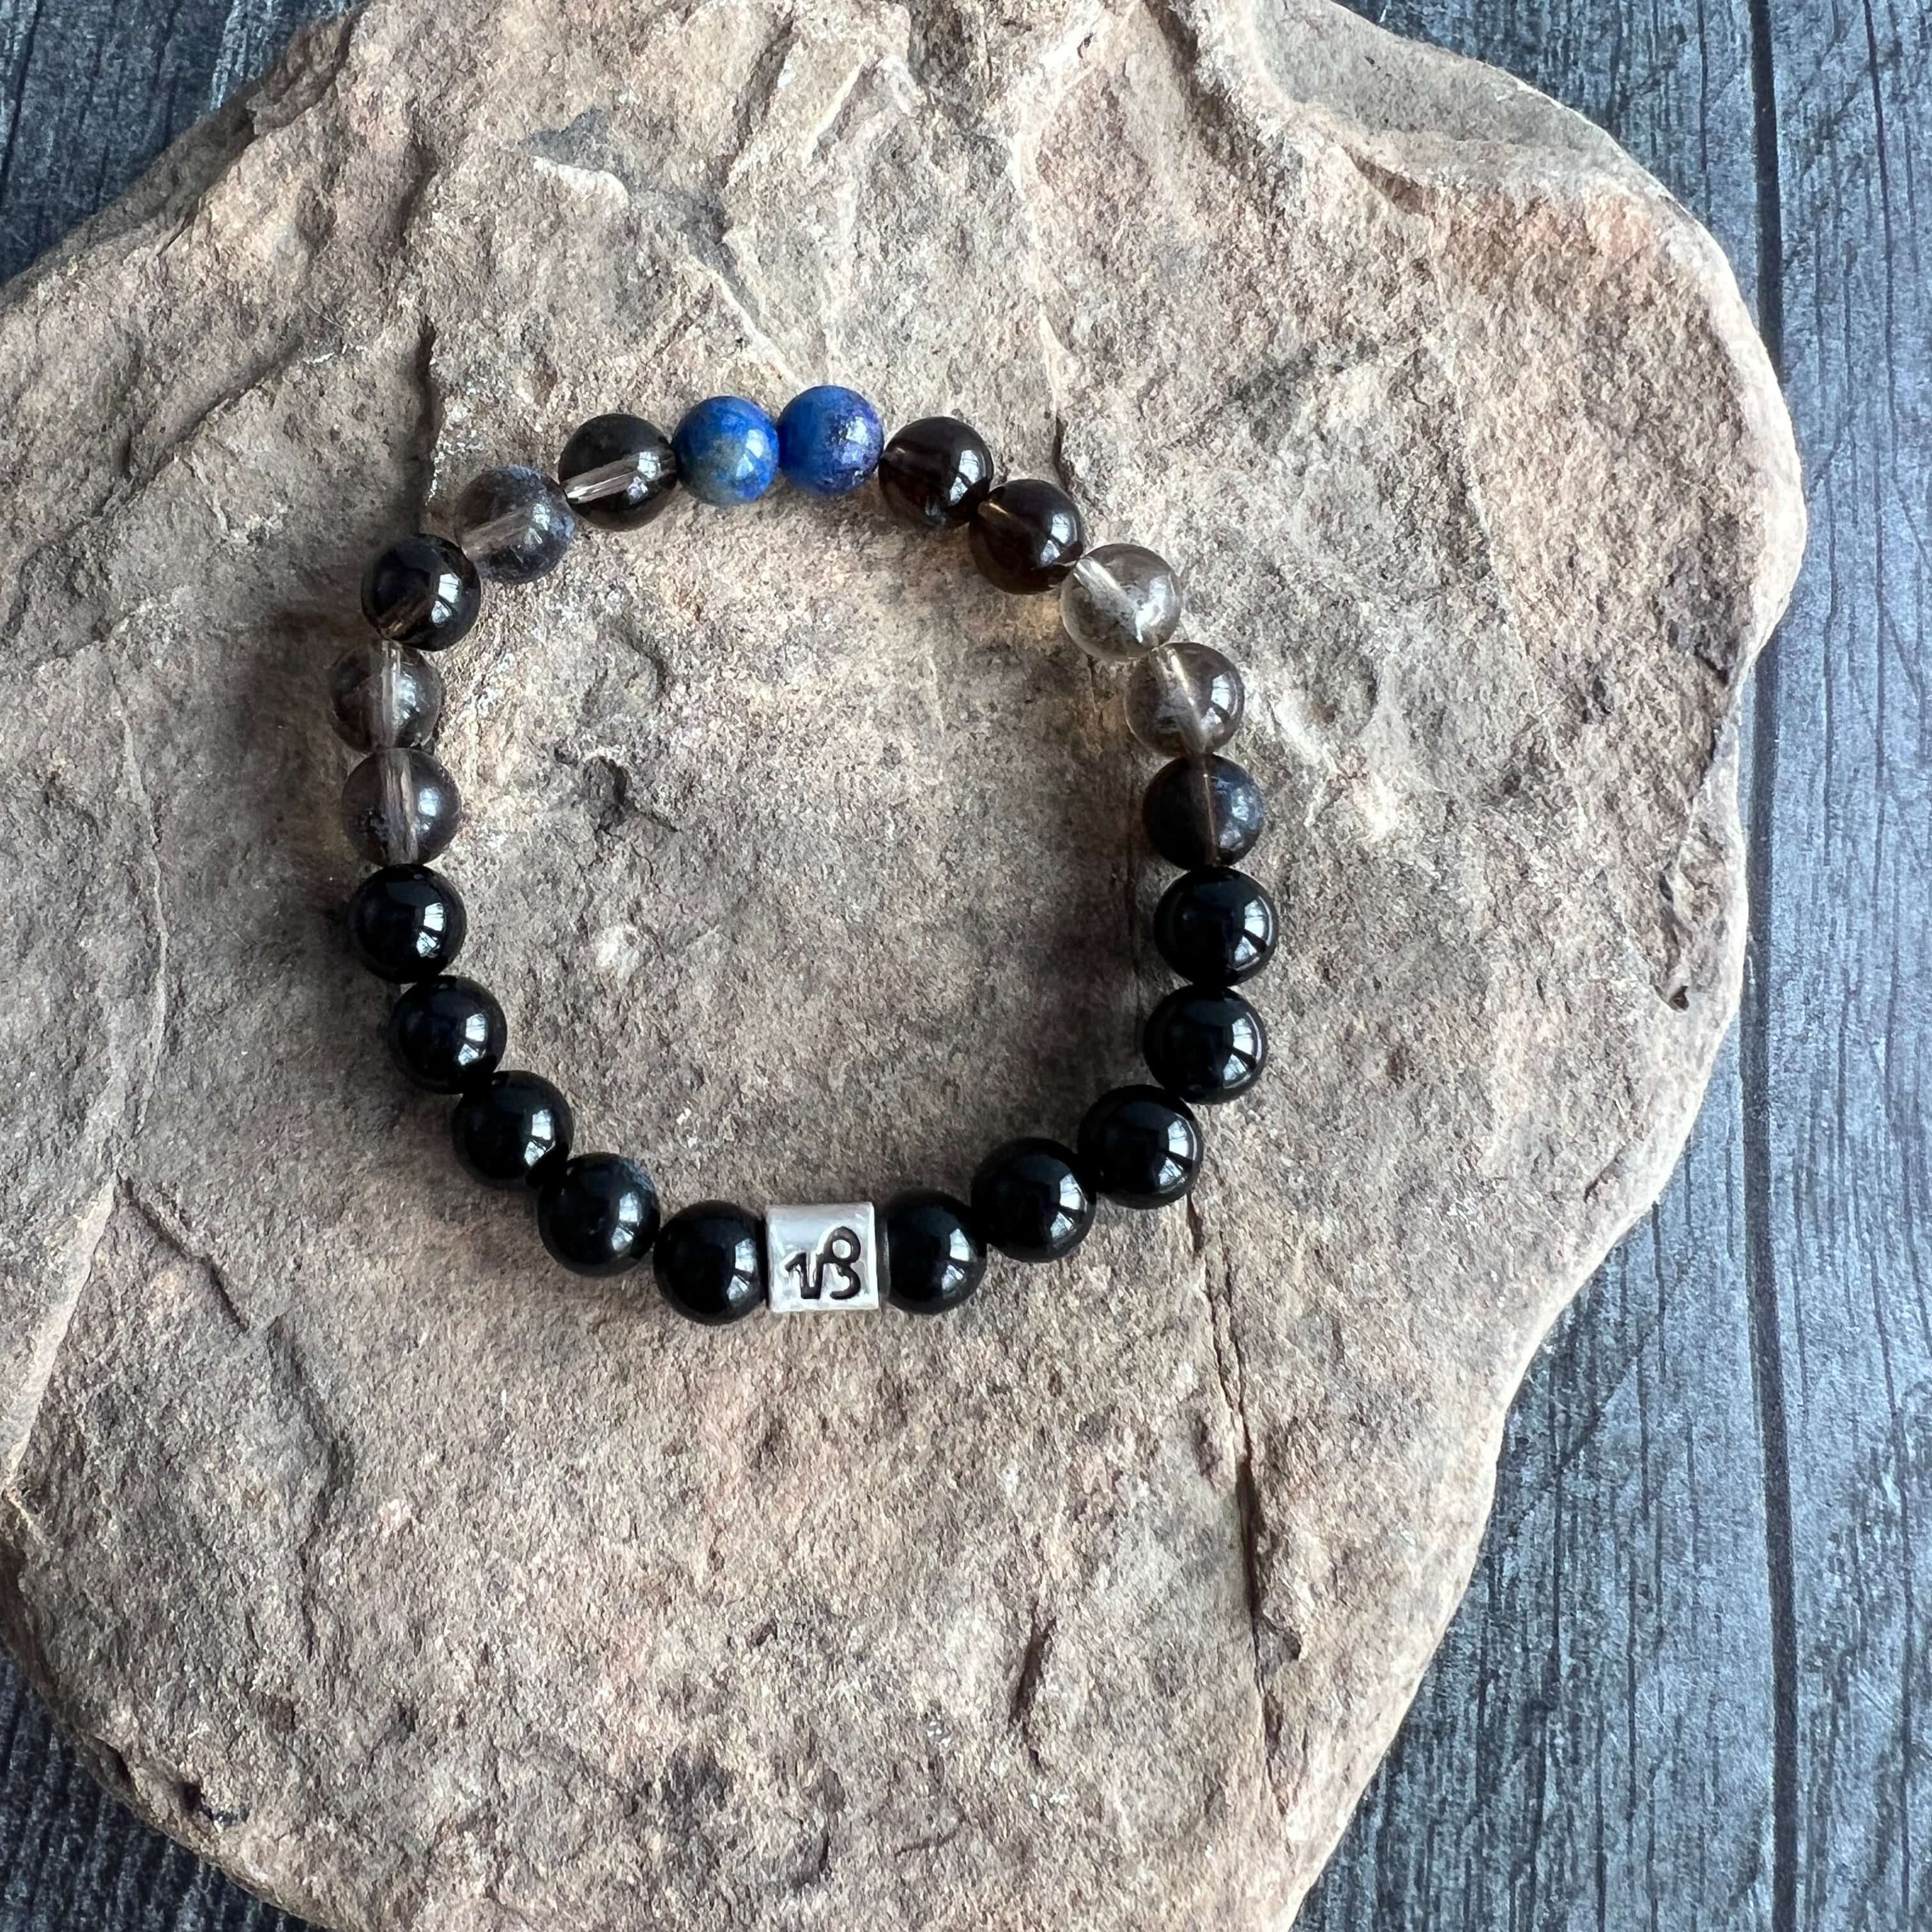 Capricorn Zodiac Bracelet The Capricorn Zodiac Bracelet is created with a combination of Lapis Lazuli, Smoky Quartz, and Onyx beads, which resonate with the strong and determined qualities associated with this zodiac sign.